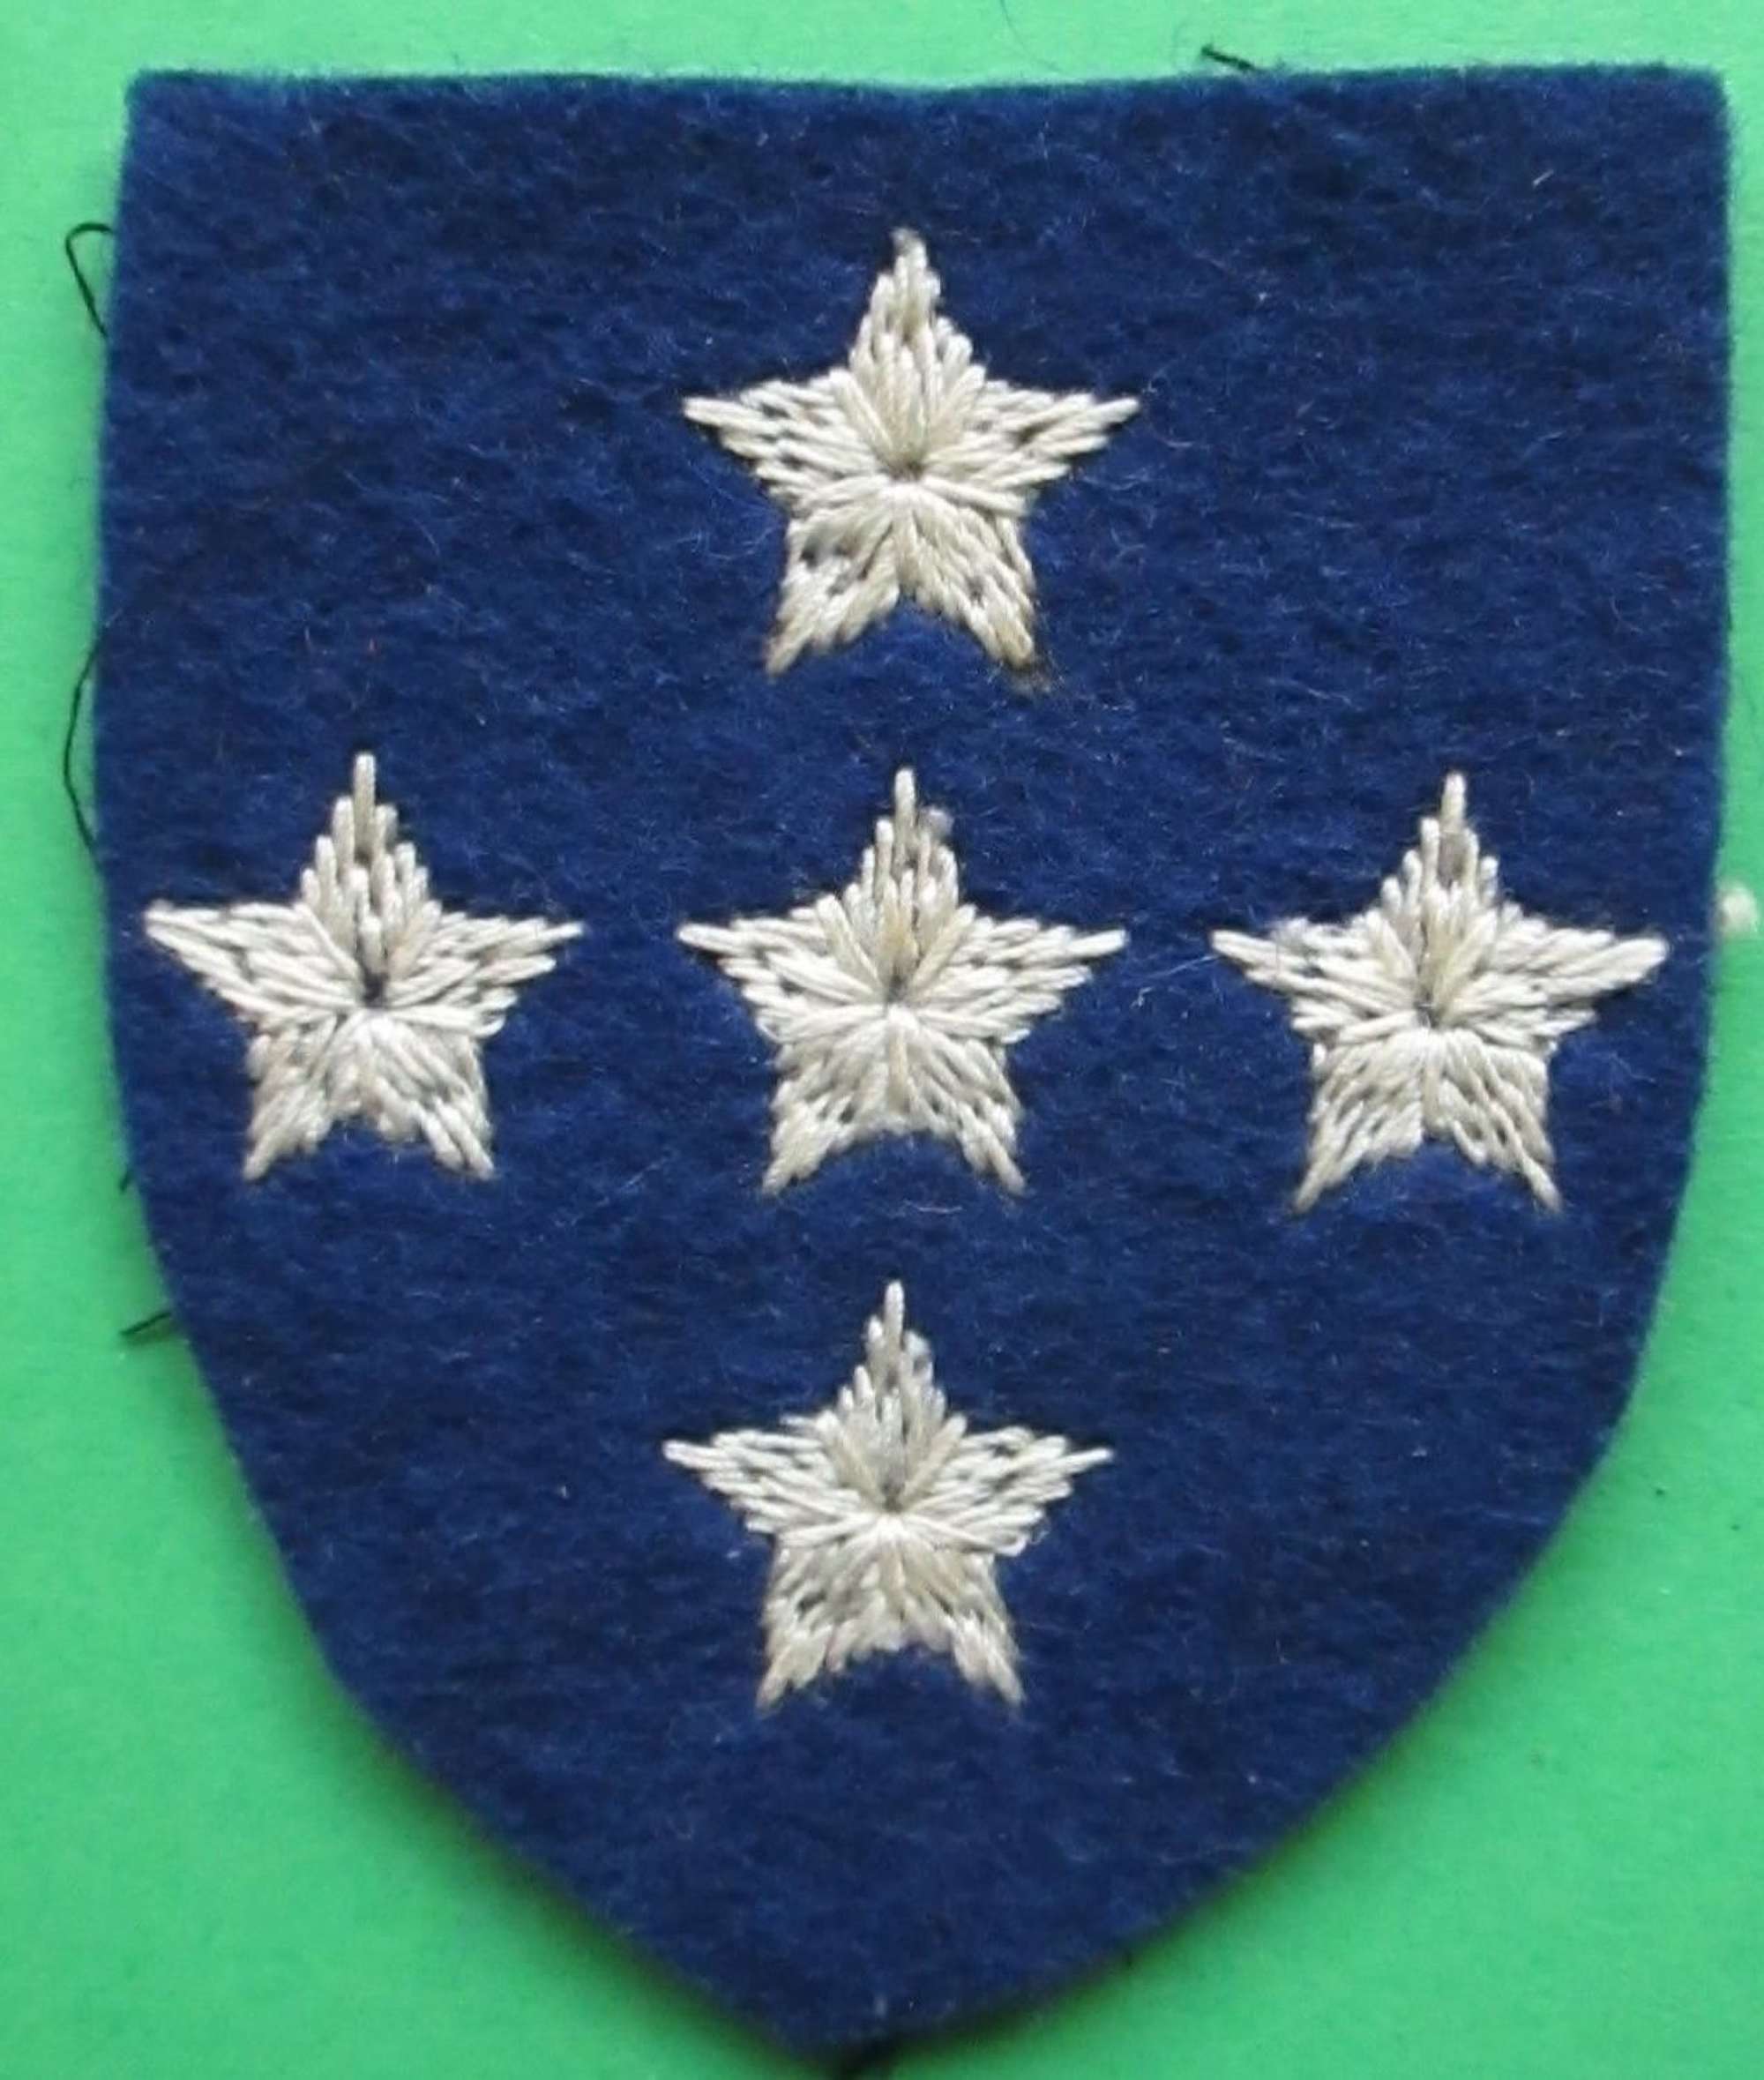 A FORMATION PATCH FOR THE ROYAL ARMY ORDNANCE CORPS